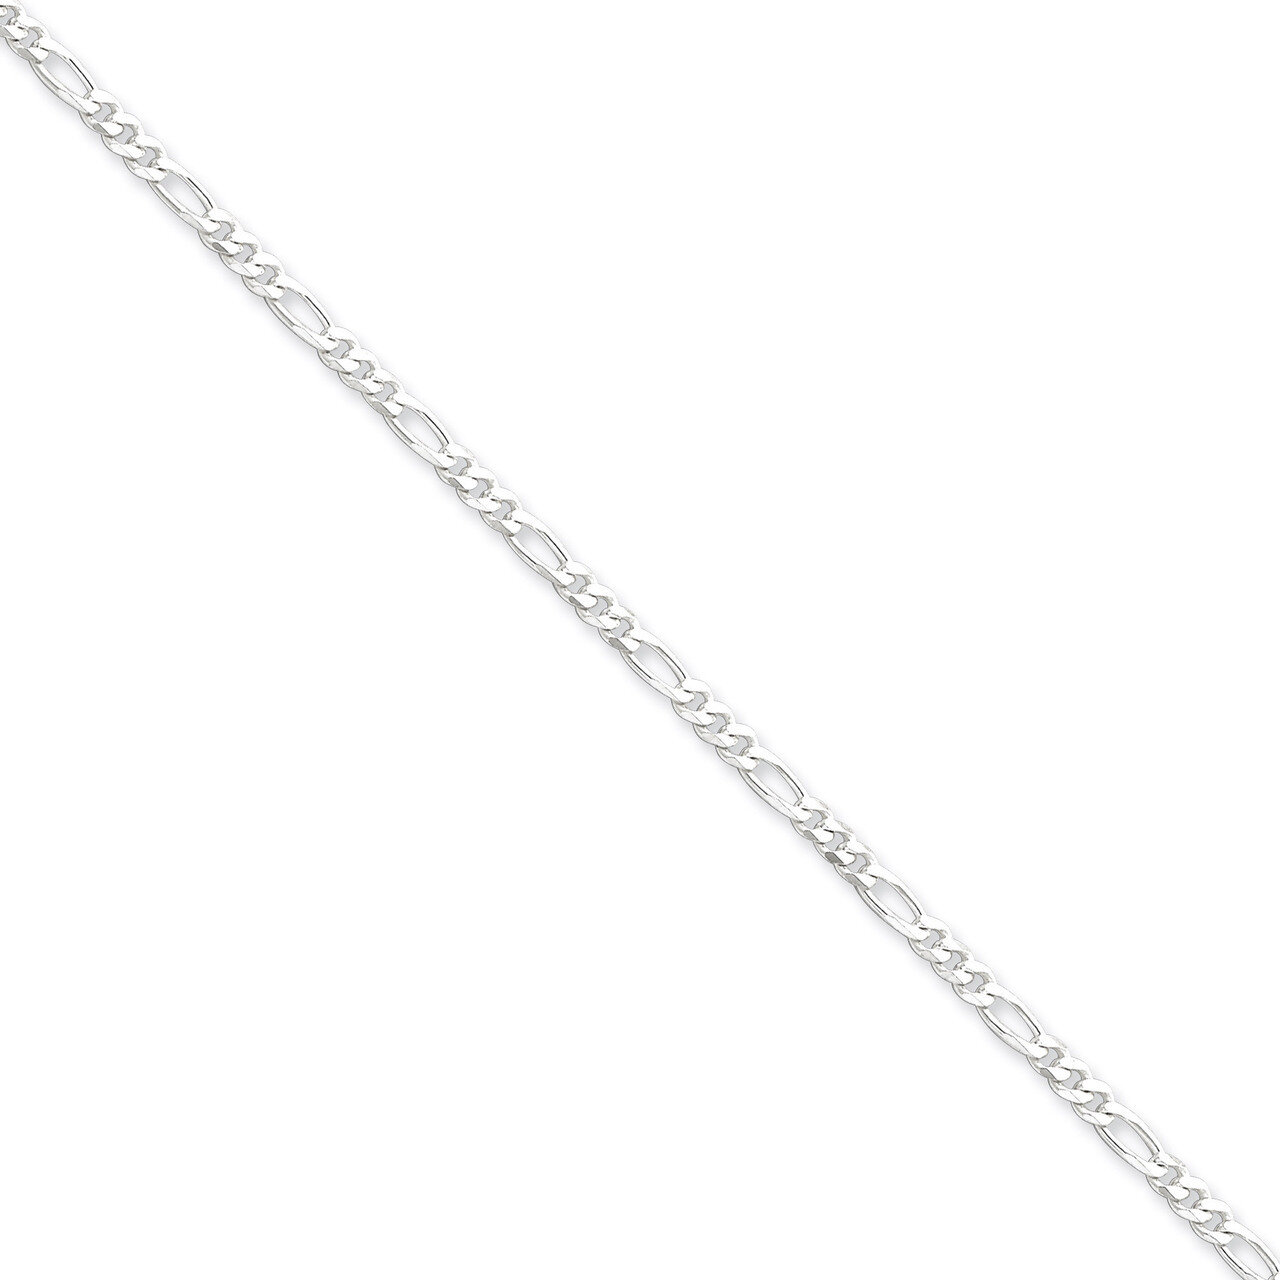 10 Inch 3mm Figaro Chain Sterling Silver QFG080-10